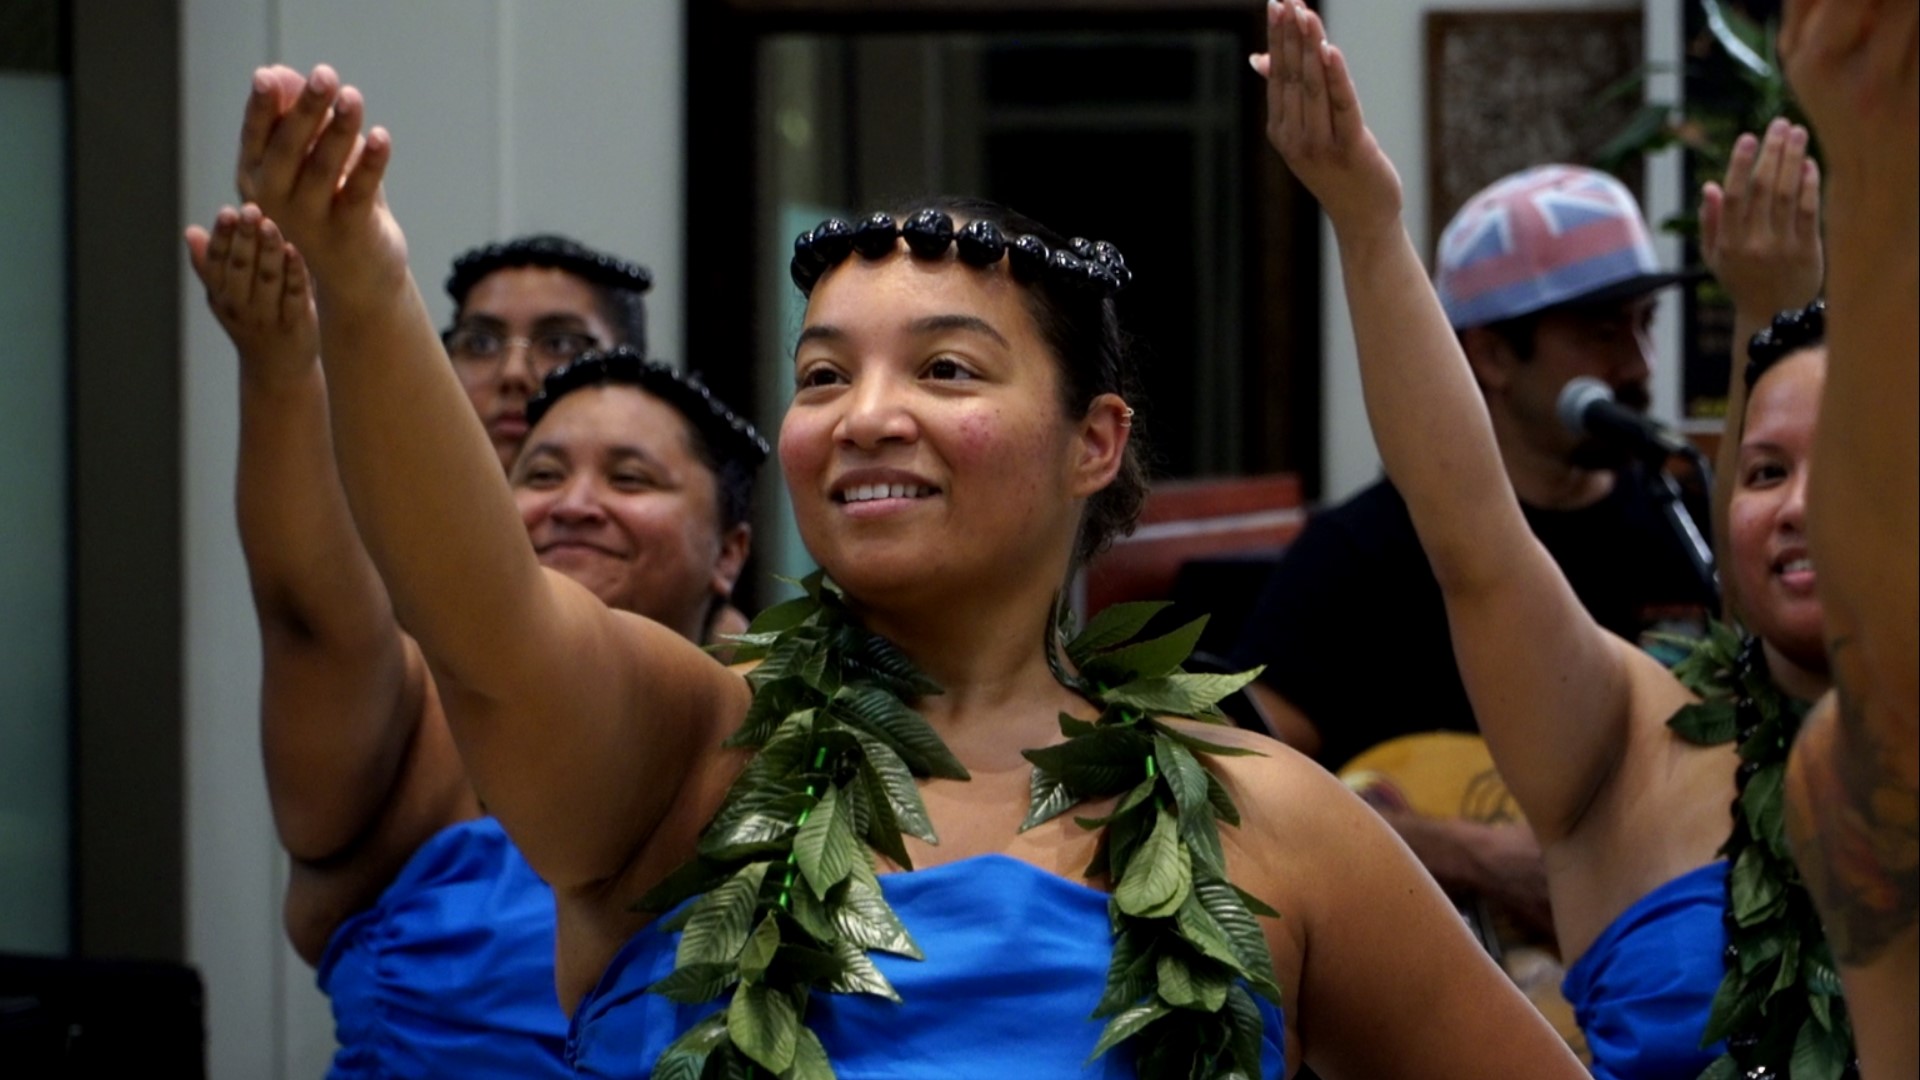 Sacramento based Ohana Dance Group hosted a Maui benefit concert to bring communities together, share culture and raise funds for wildfire victims Saturday.